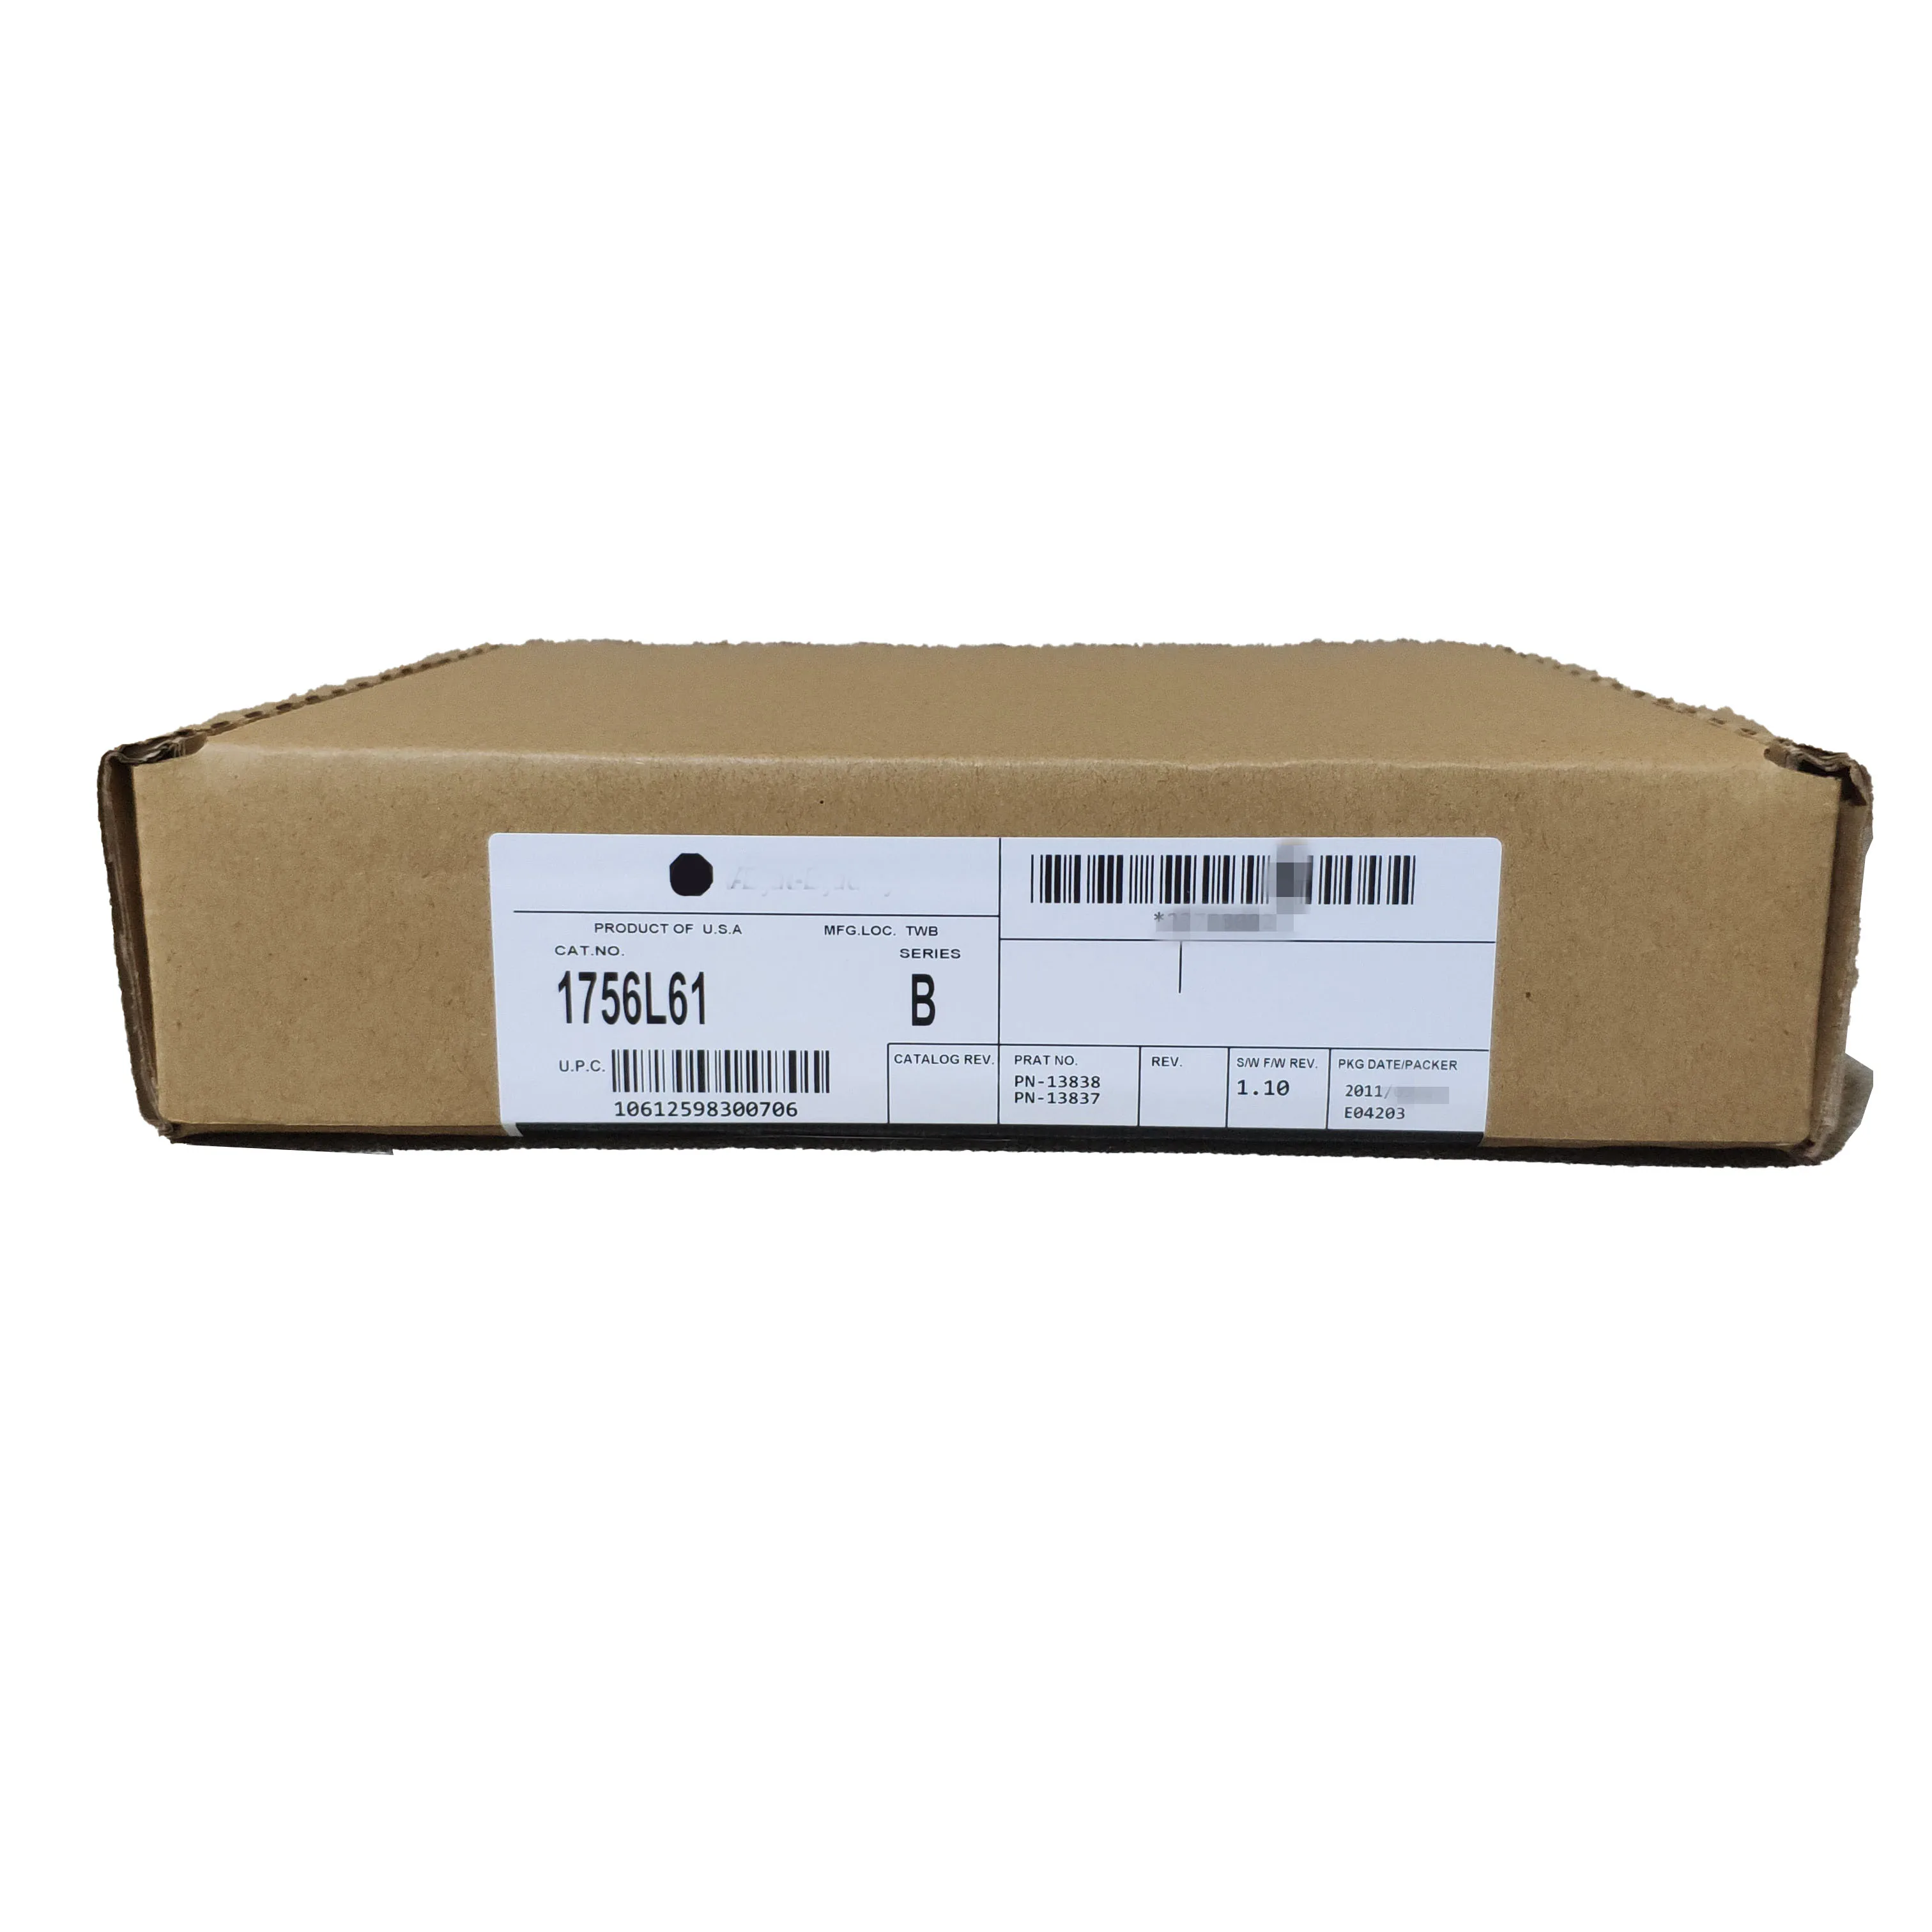 

New Original In BOX 1756-L61 1756L61 {Warehouse stock} 1 Year Warranty Shipment within 24 hours